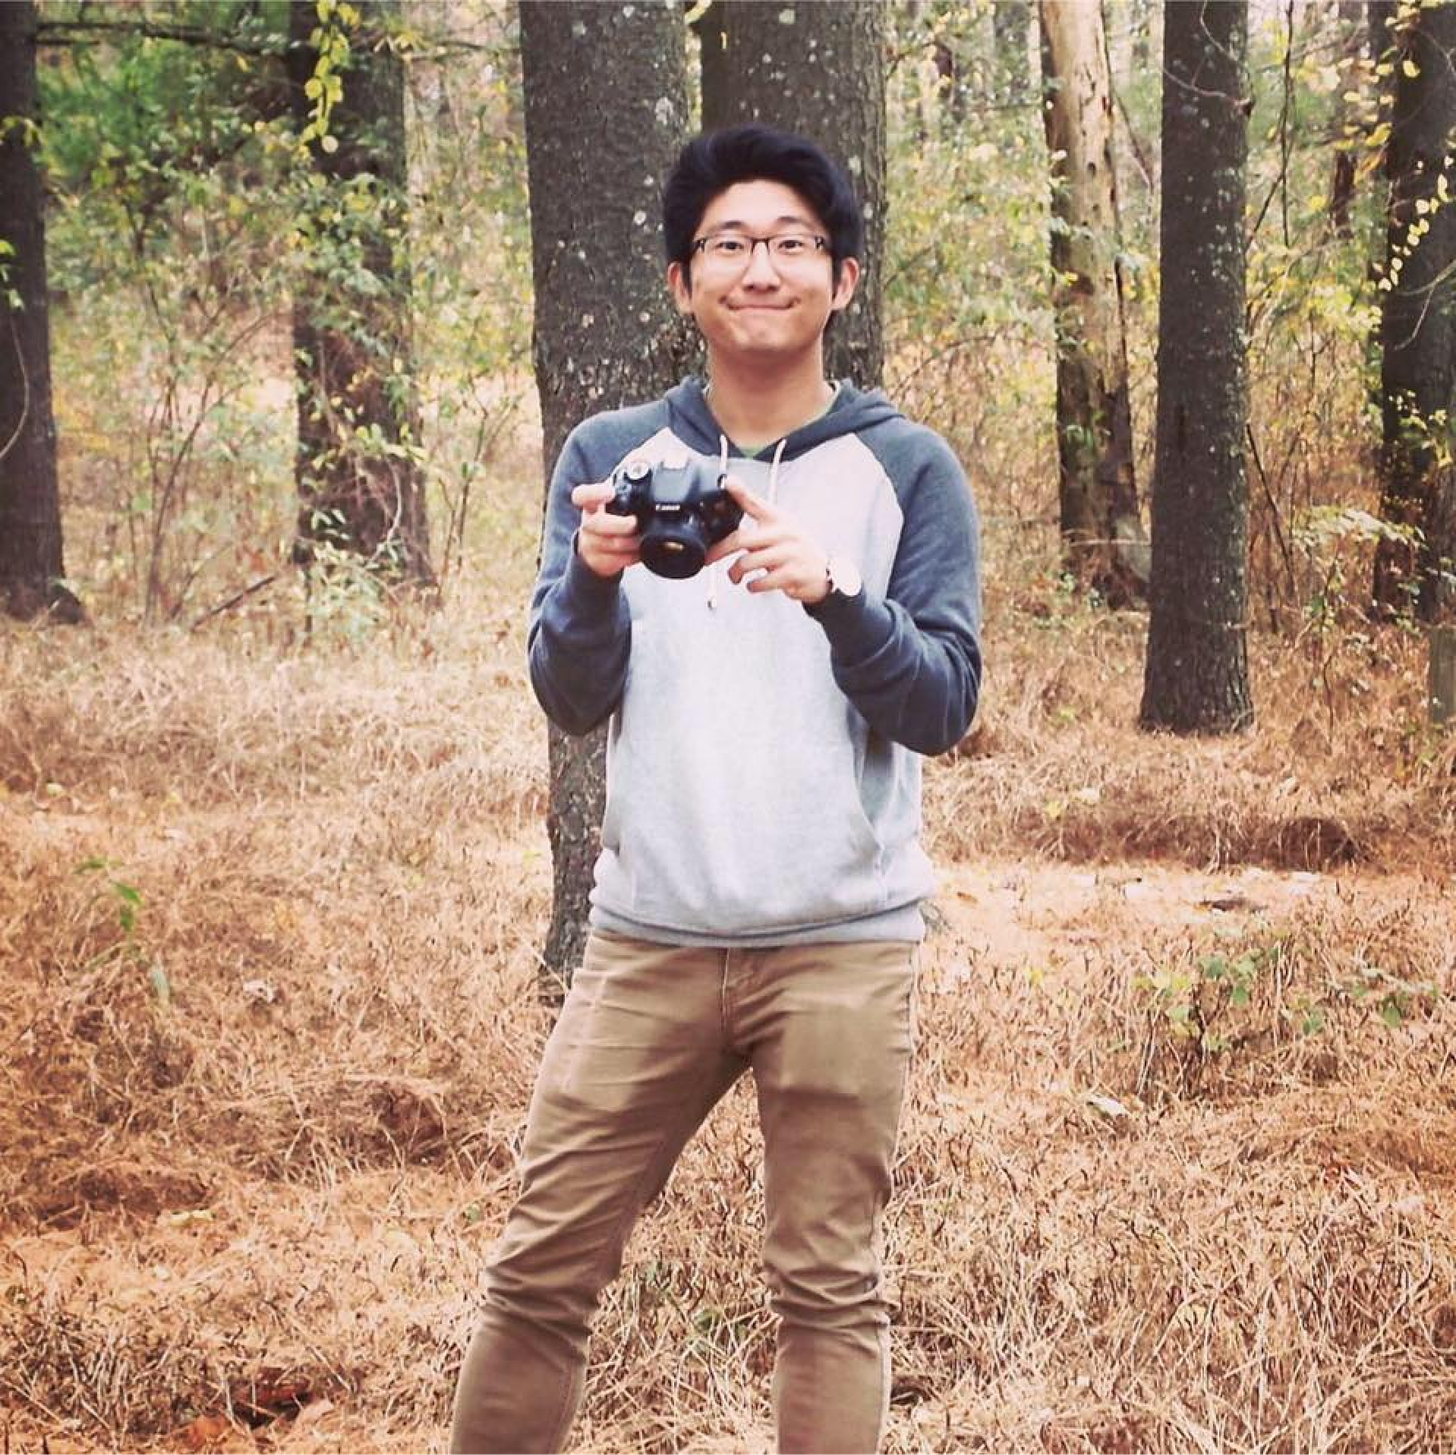 Sam smiling while holding his DSLR camera standing in the middle of a field with trees in the background.